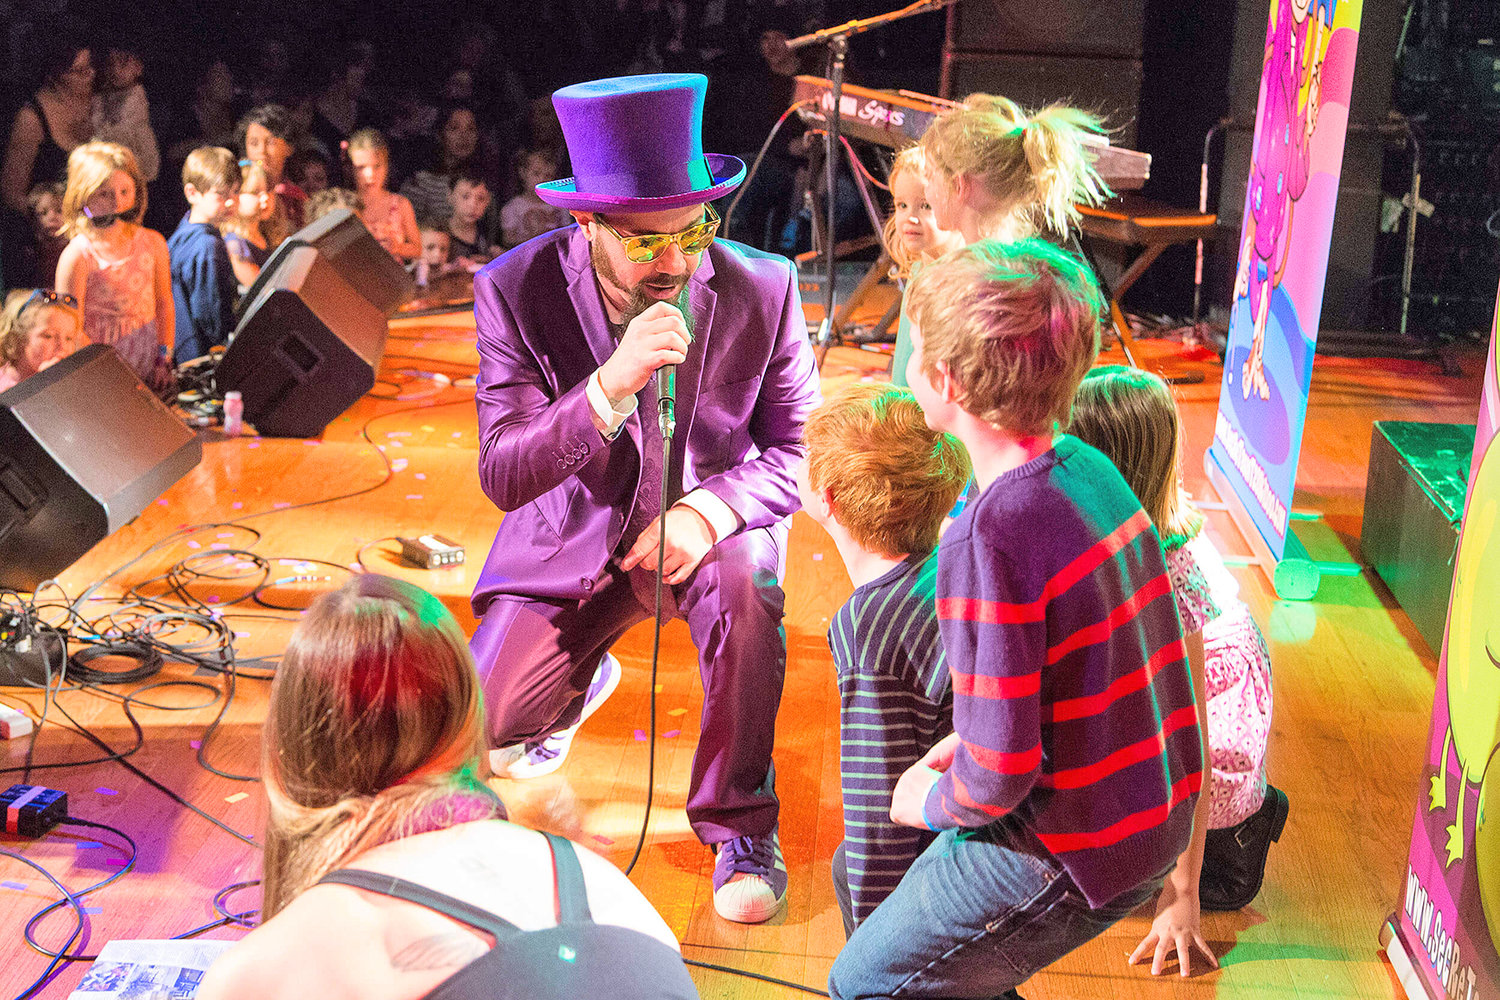 The Secret Agency will bring their live hip-hop plus a songwriting workshop to the Art Alive! Family Day at the Museum from 10 a.m. to 2 p.m. Feb. 23 at the Munson-Williams-Proctor Arts Institute in Utica.